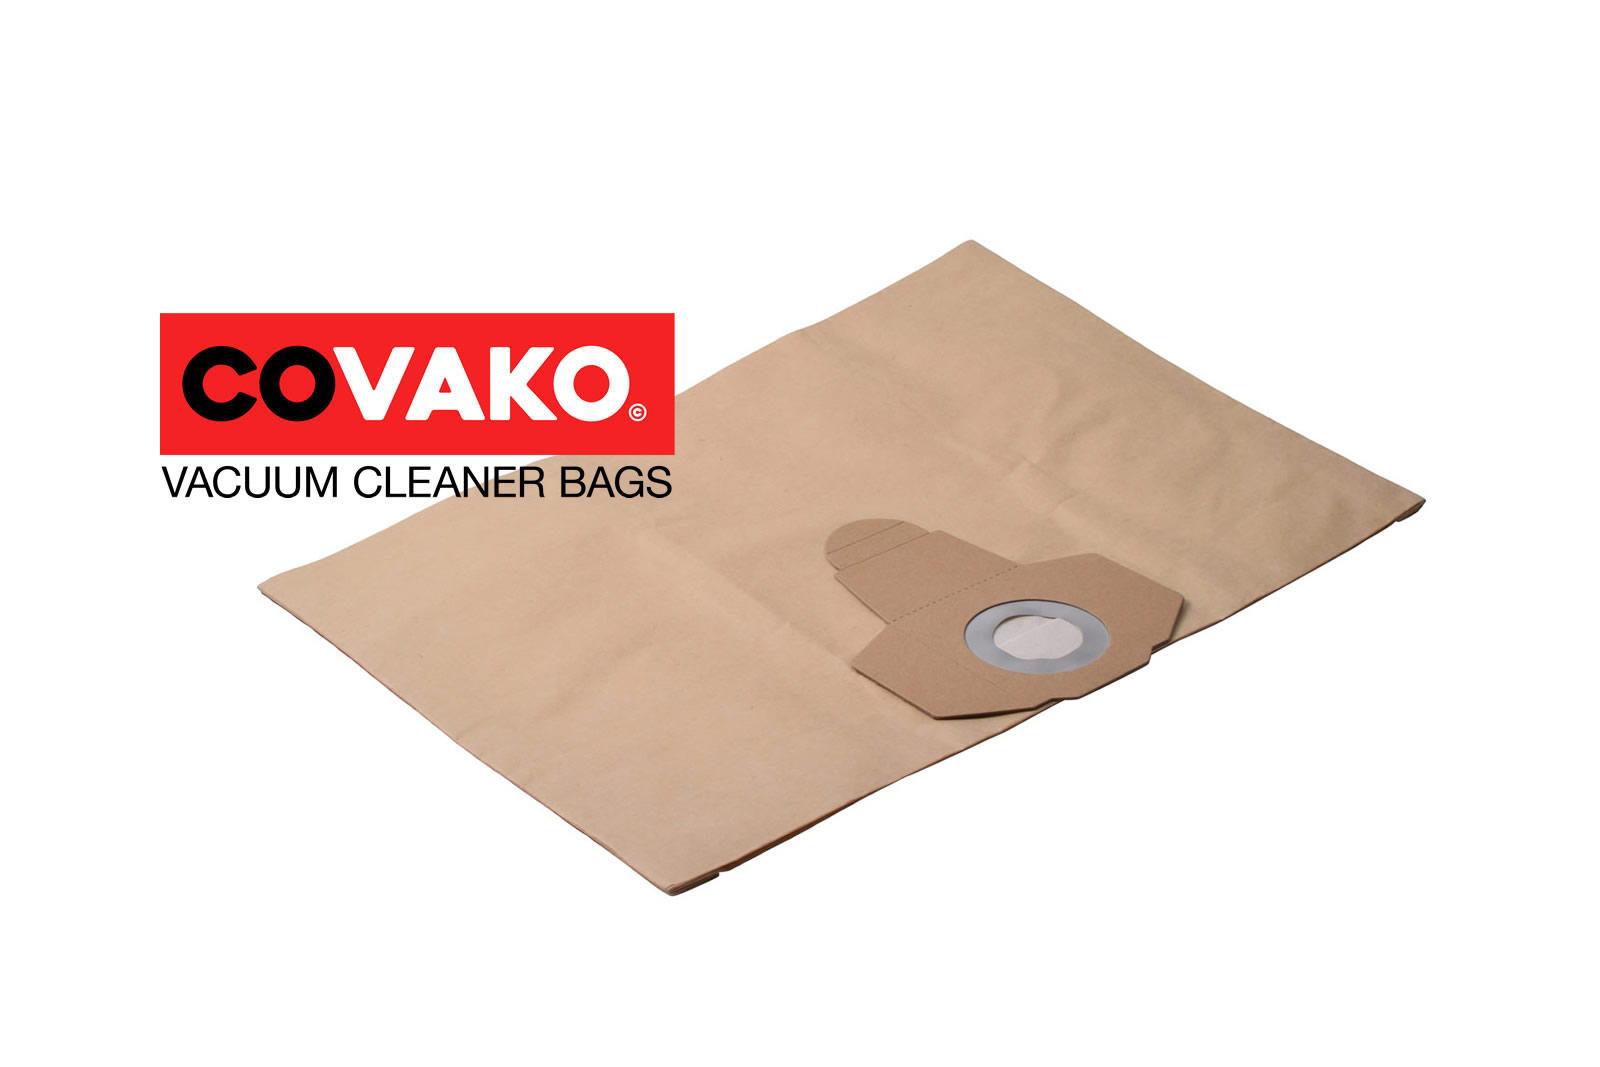 Einhell TH-VC 1815 / Paper - Einhell vacuum cleaner bags